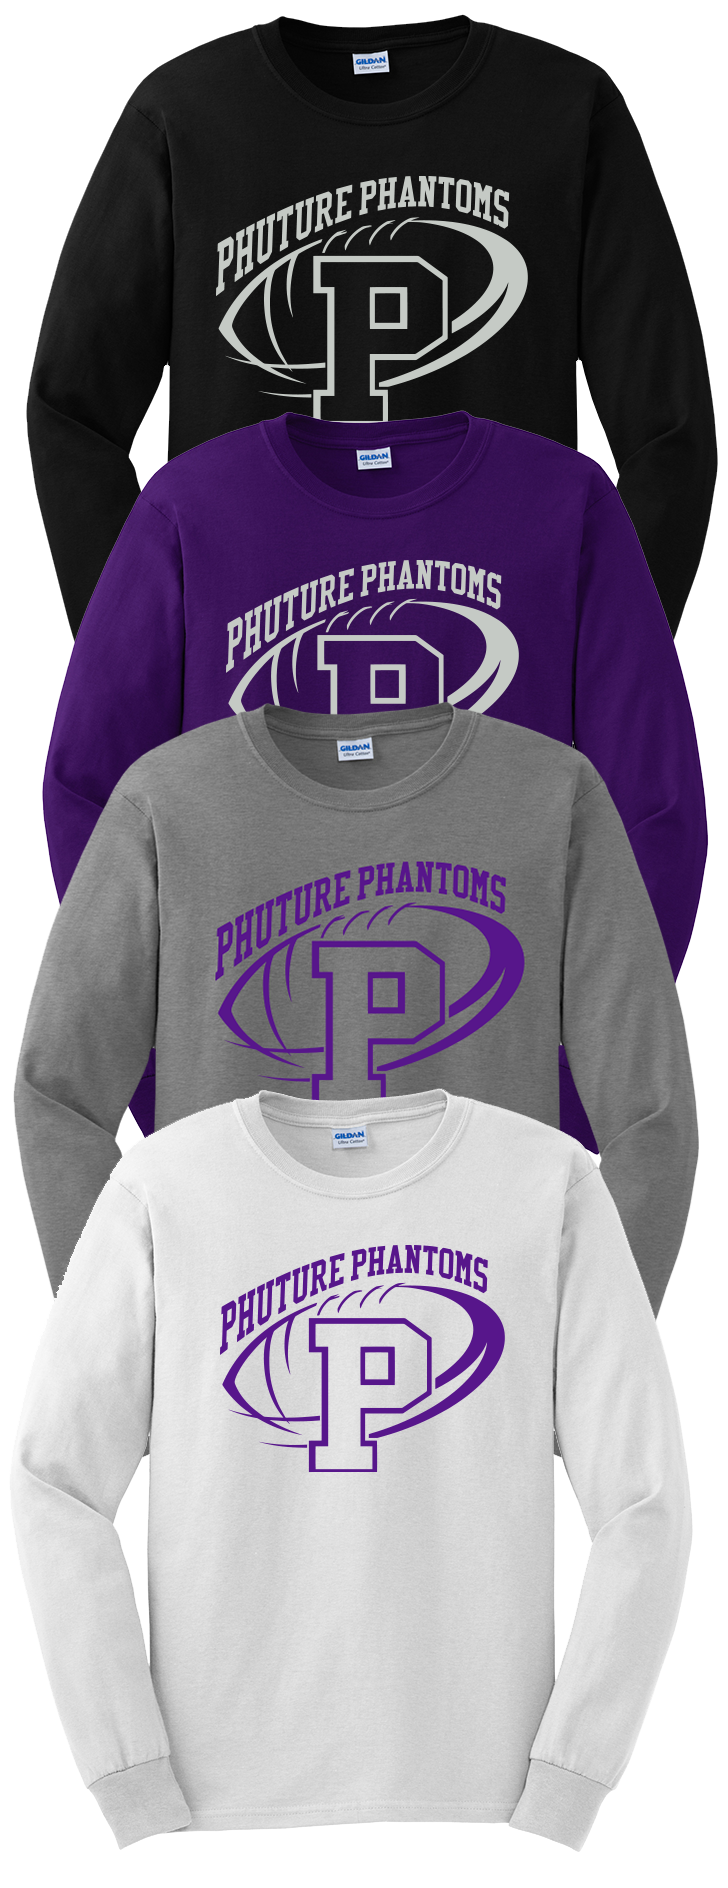 Phantoms Youth and Adult Long Sleeve Tshirt